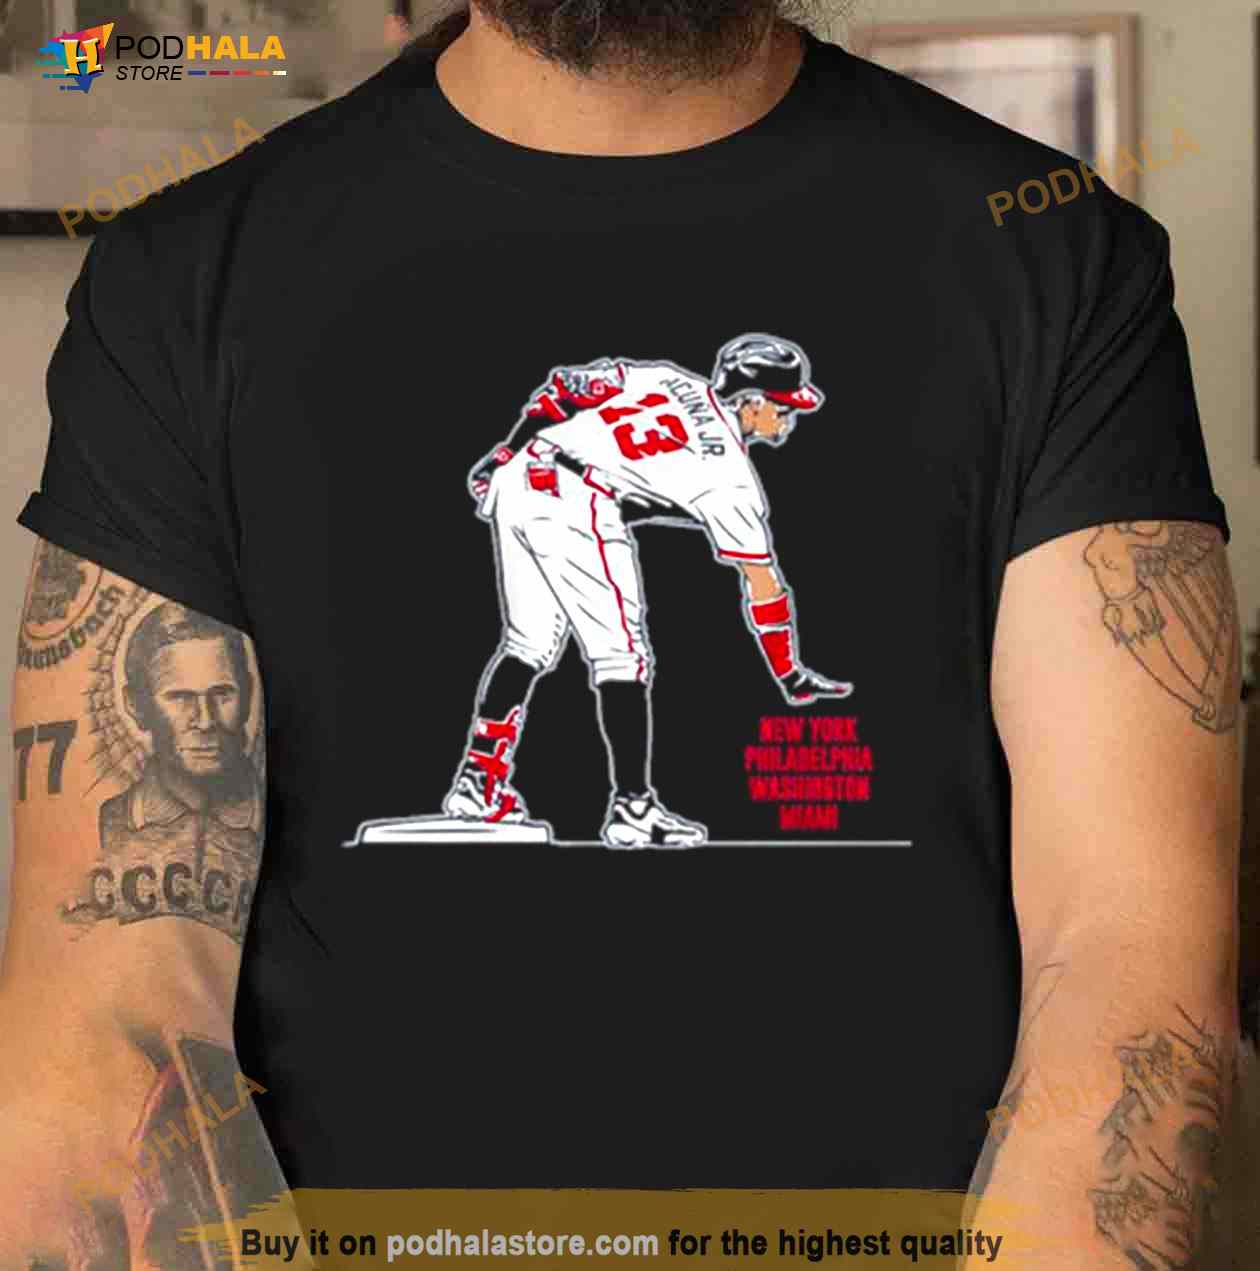 Official ronald Acuna Jr 40 Home Runs Atlanta Braves Poster shirt, hoodie,  sweater, long sleeve and tank top